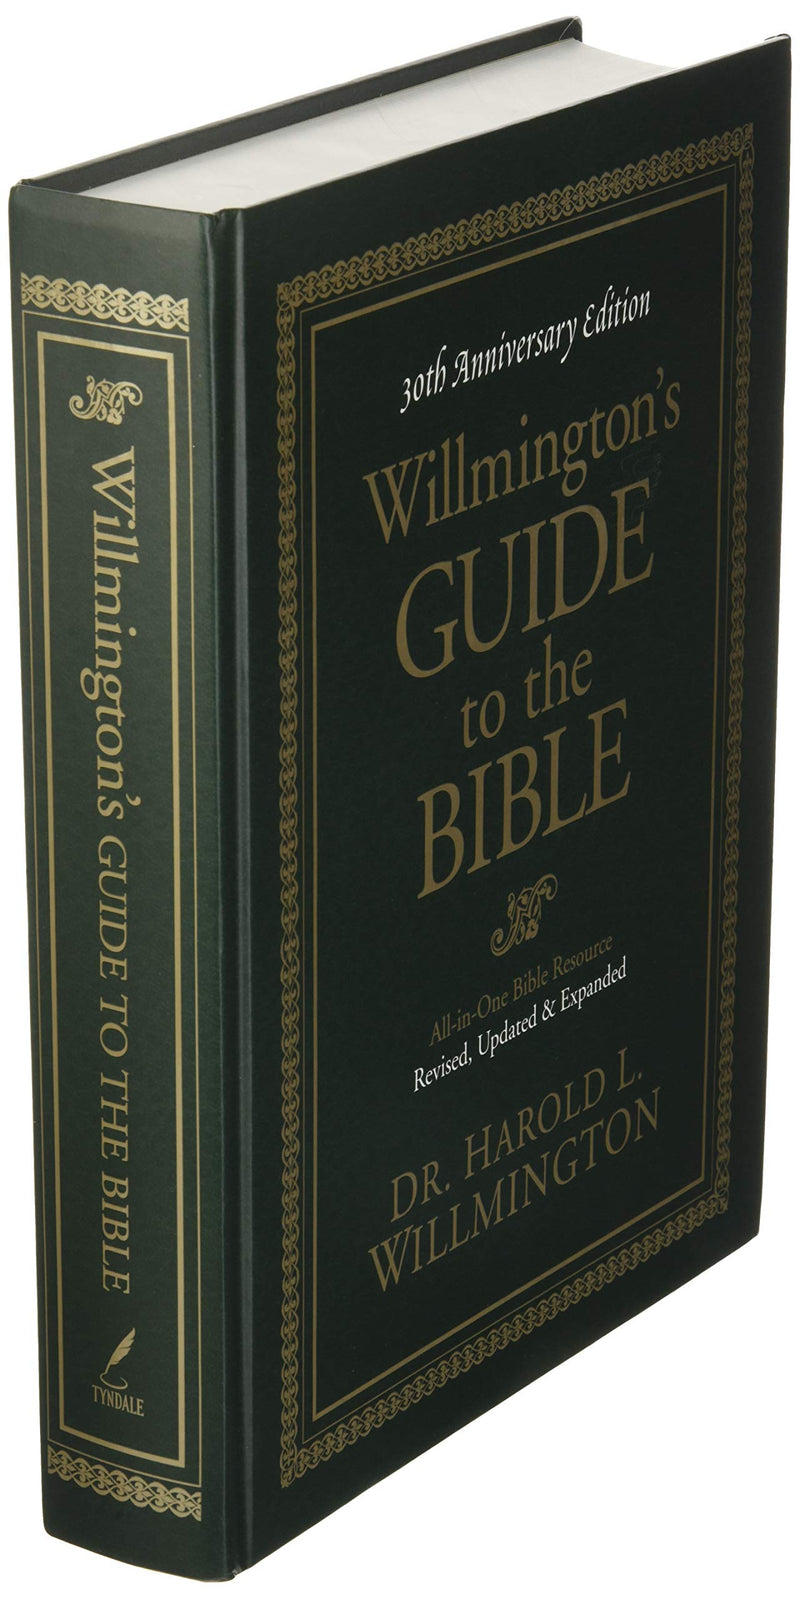 WILLMINGTON'S GUIDE TO THE BIBLE HARDCOVER